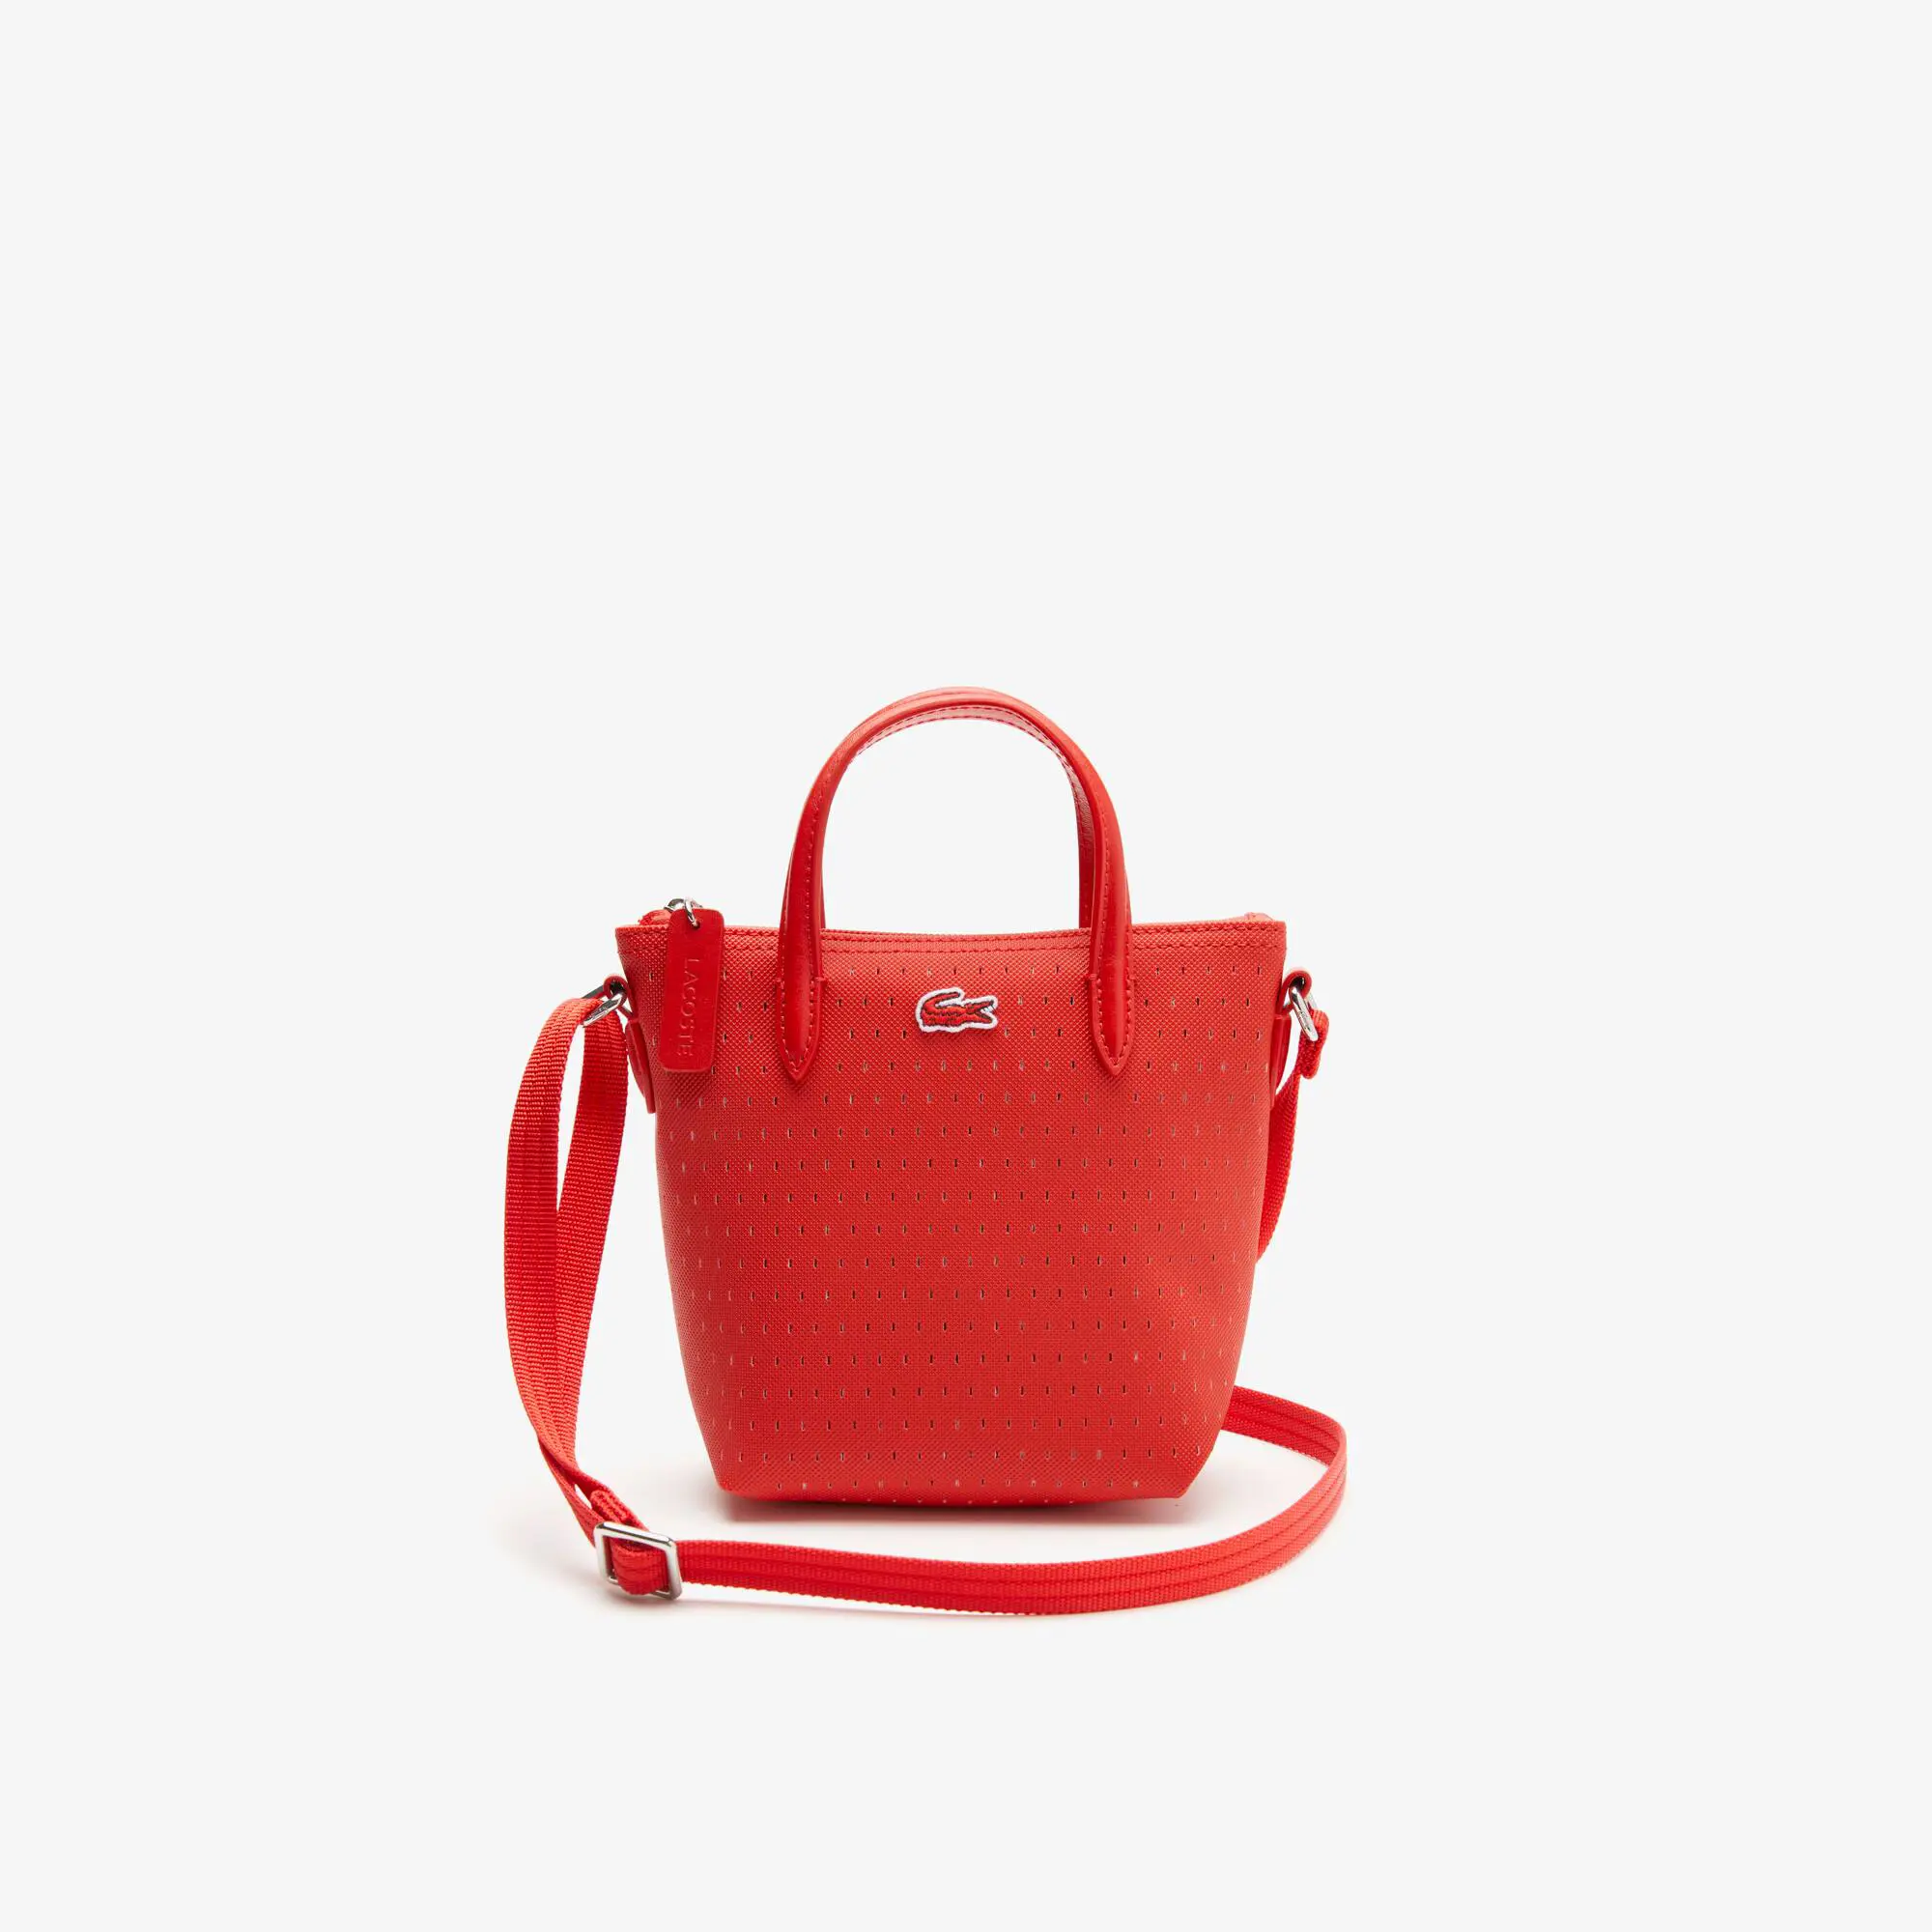 Lacoste Women’s Lacoste L.12.12 Small Perforated Tote. 2